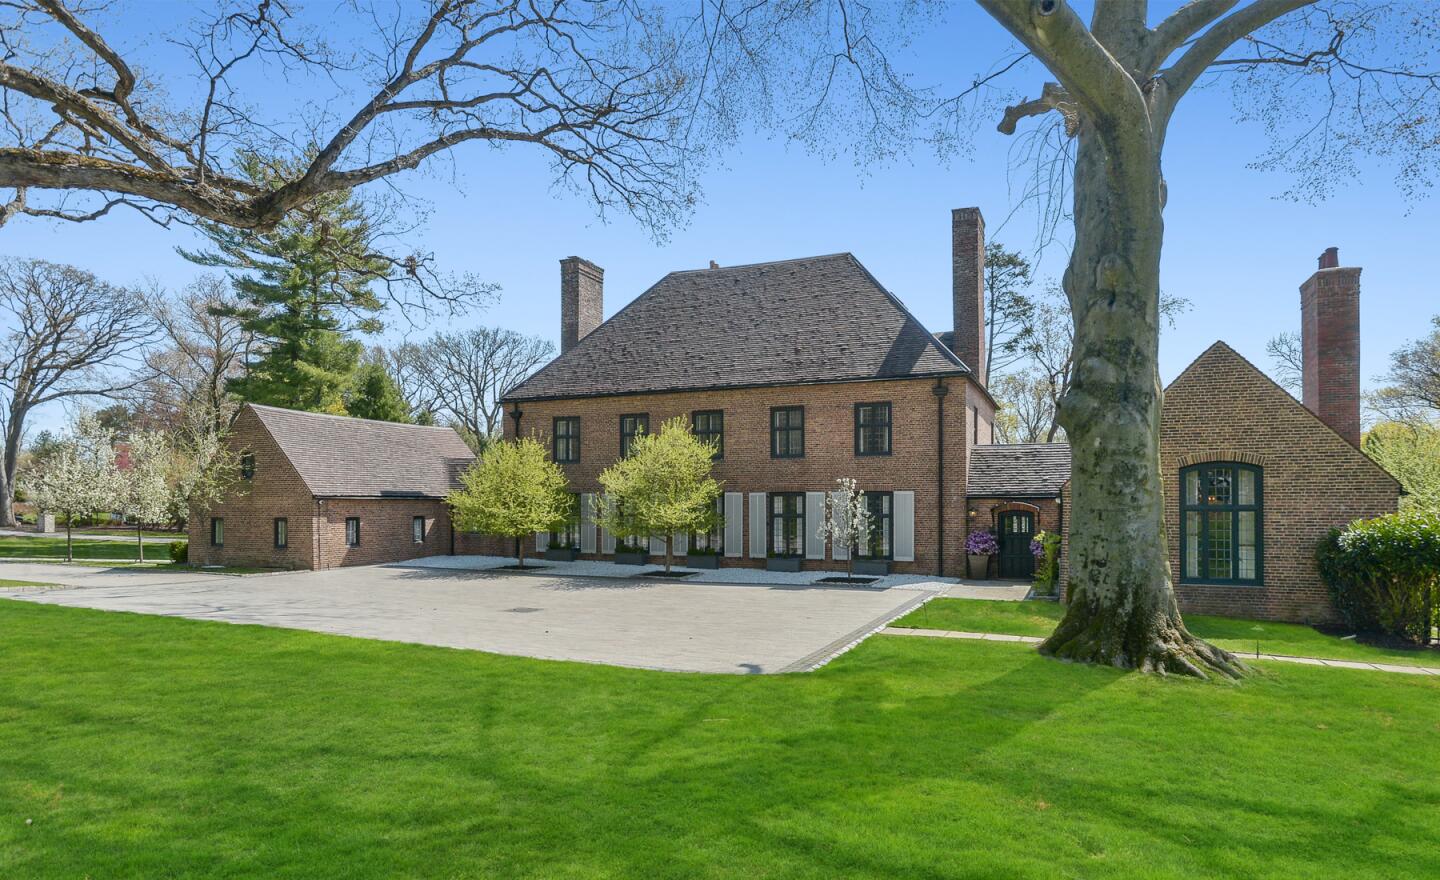 The 2.6-acre spread centers on a 1920s English manor with antique accents and an attic with a wet bar.